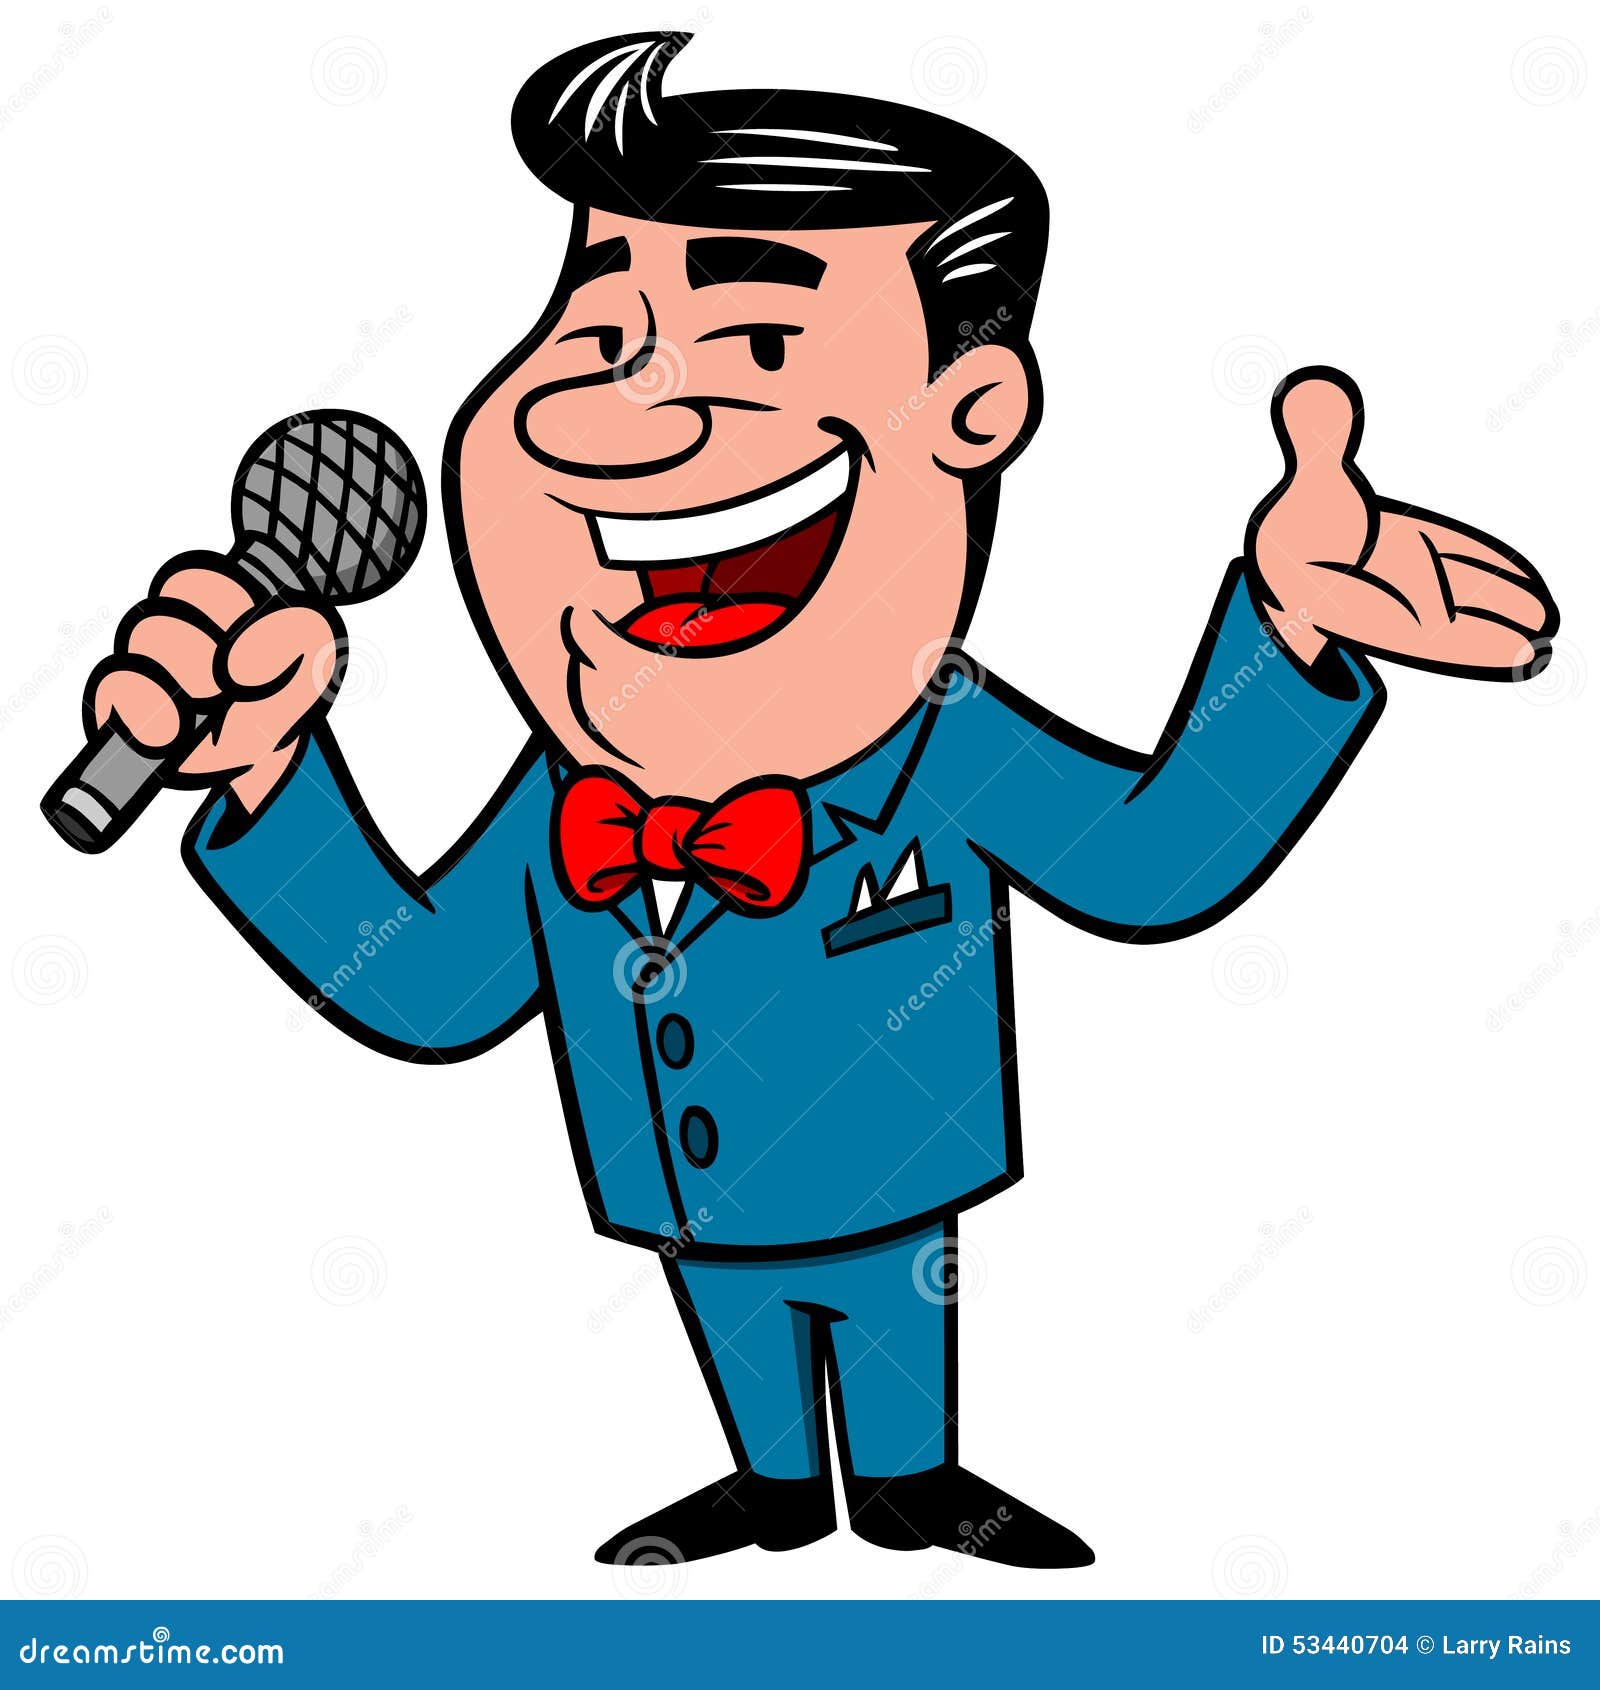 clipart game show host - photo #30